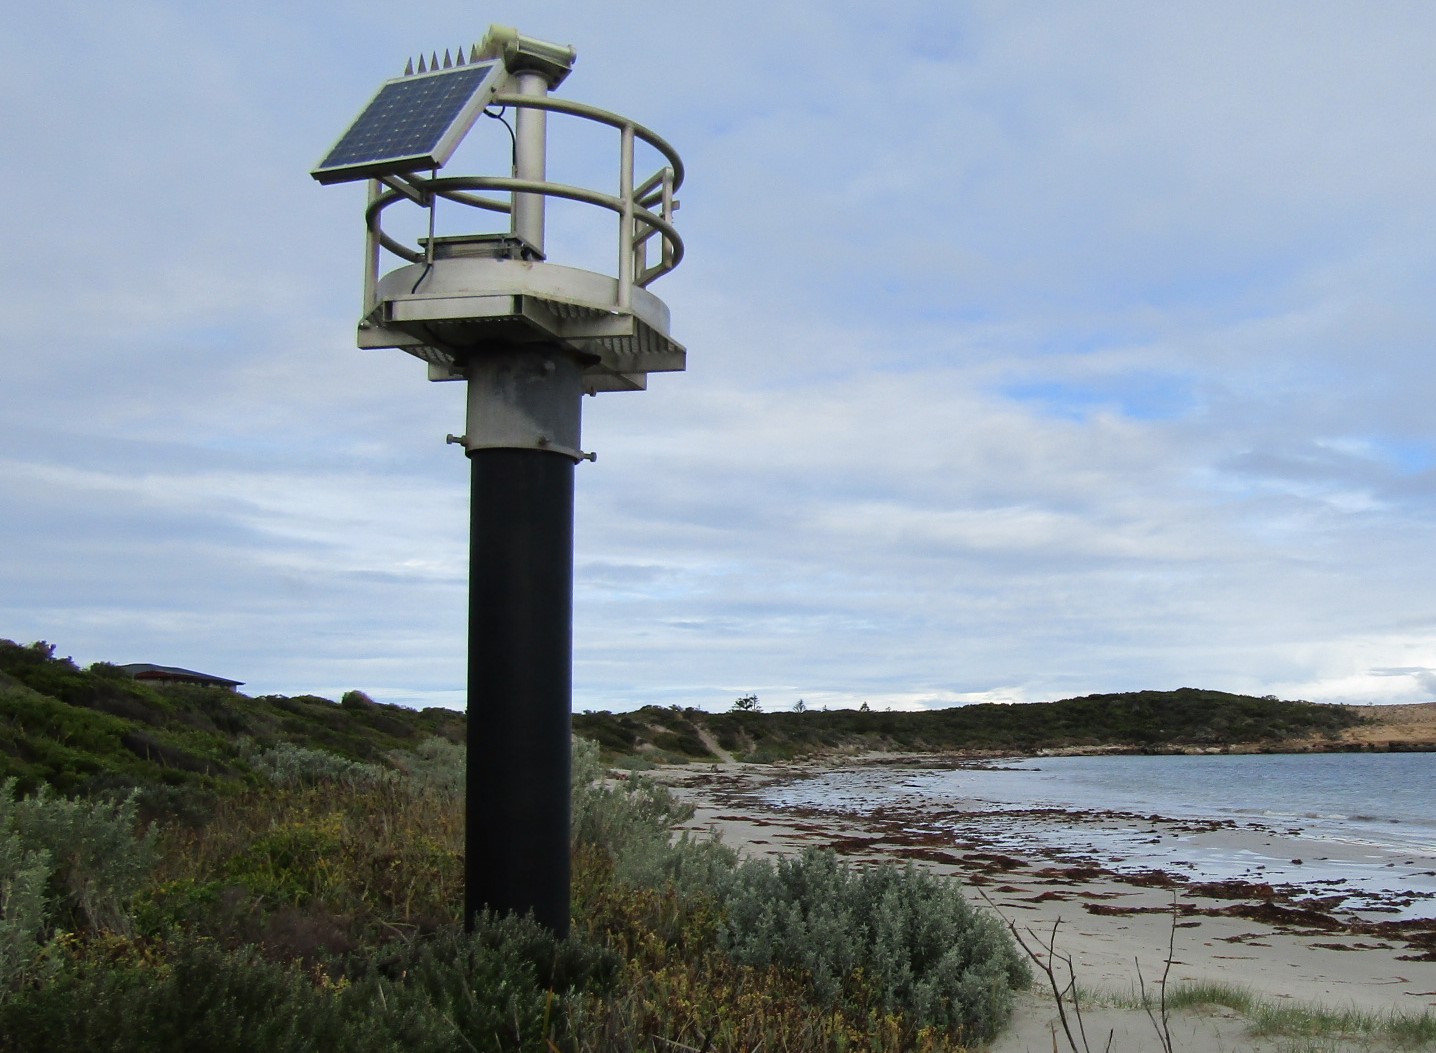 Example of a beacon proposed for Hooper beach in Robe. The navigational beacon is pictures in sand and grass on a beach